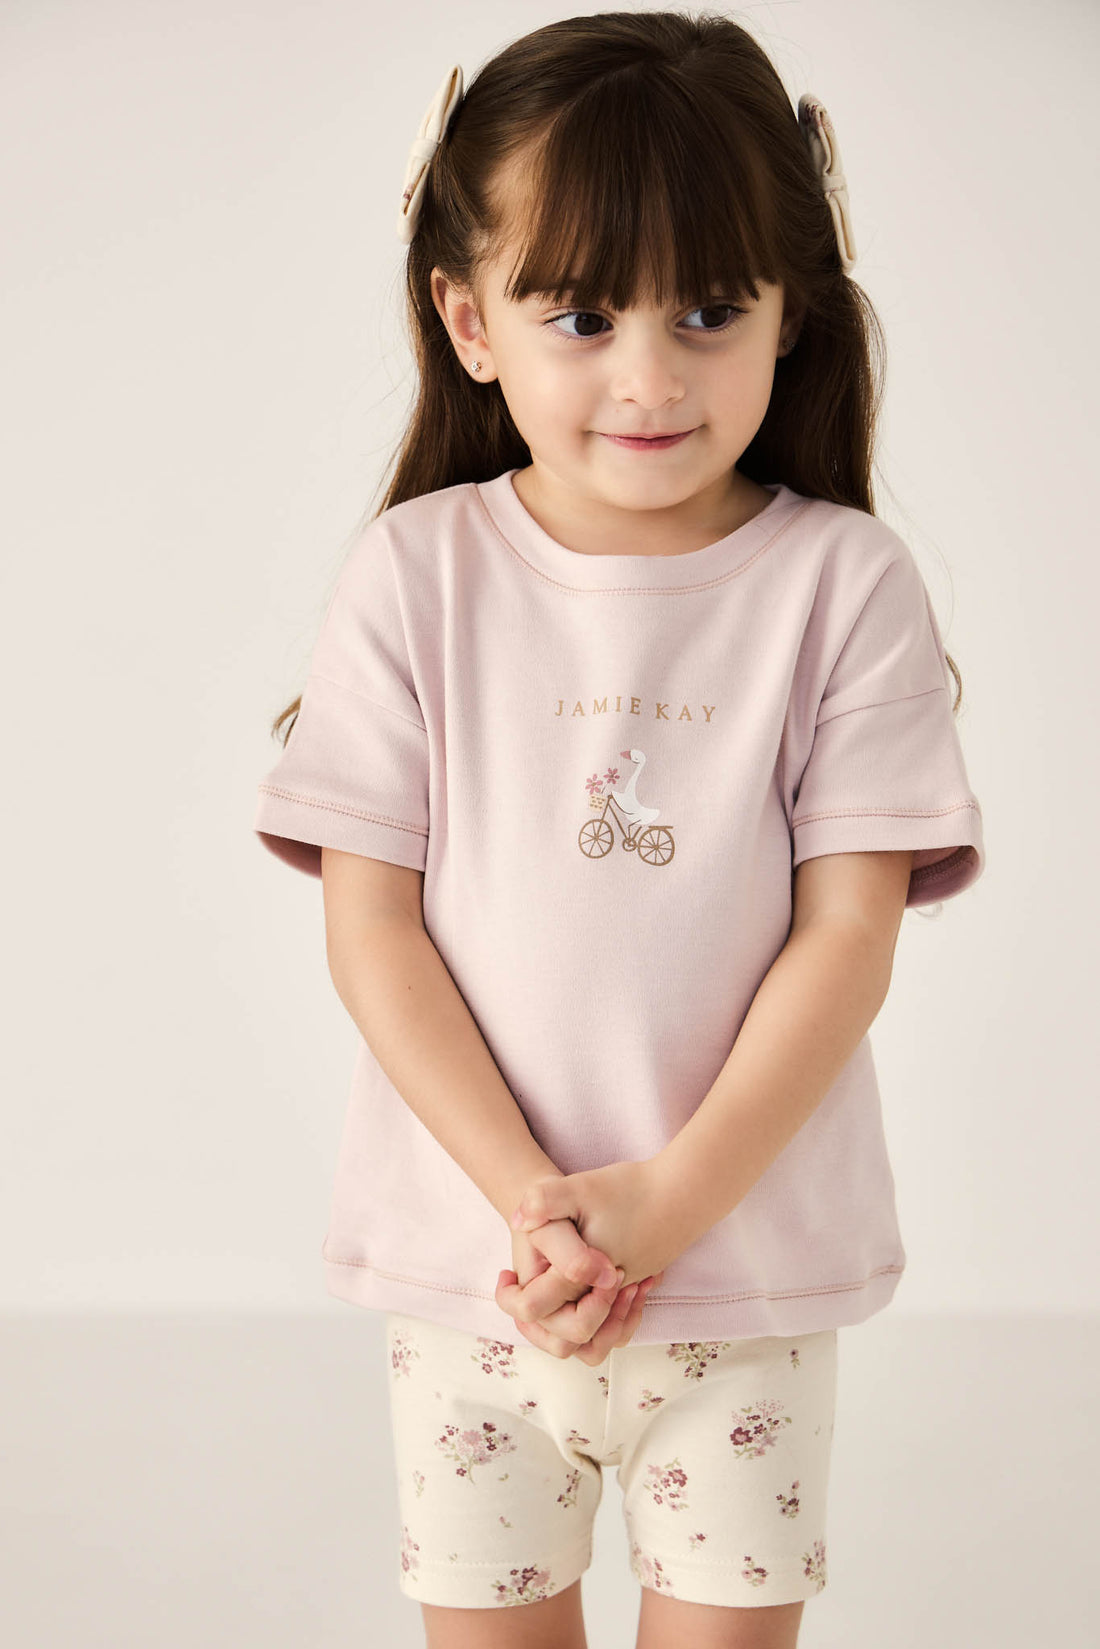 Pima Cotton Mimi Top - Gilly Violet Tint Childrens Top from Jamie Kay NZ